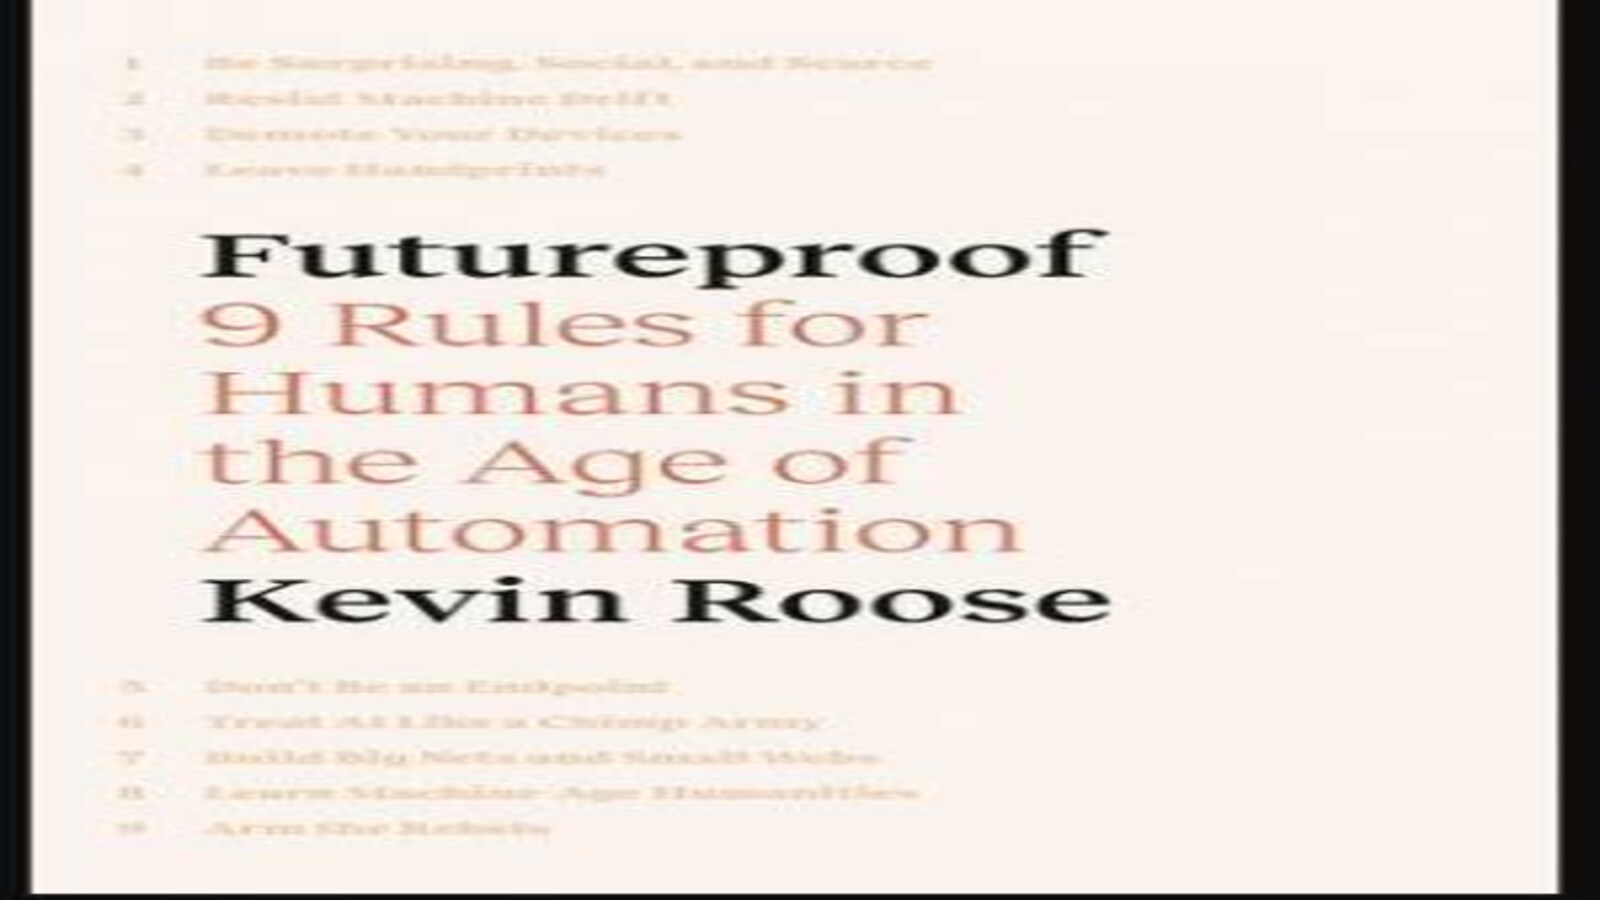 Book Review: Kevin Roose's Futureproof is superb entry point into